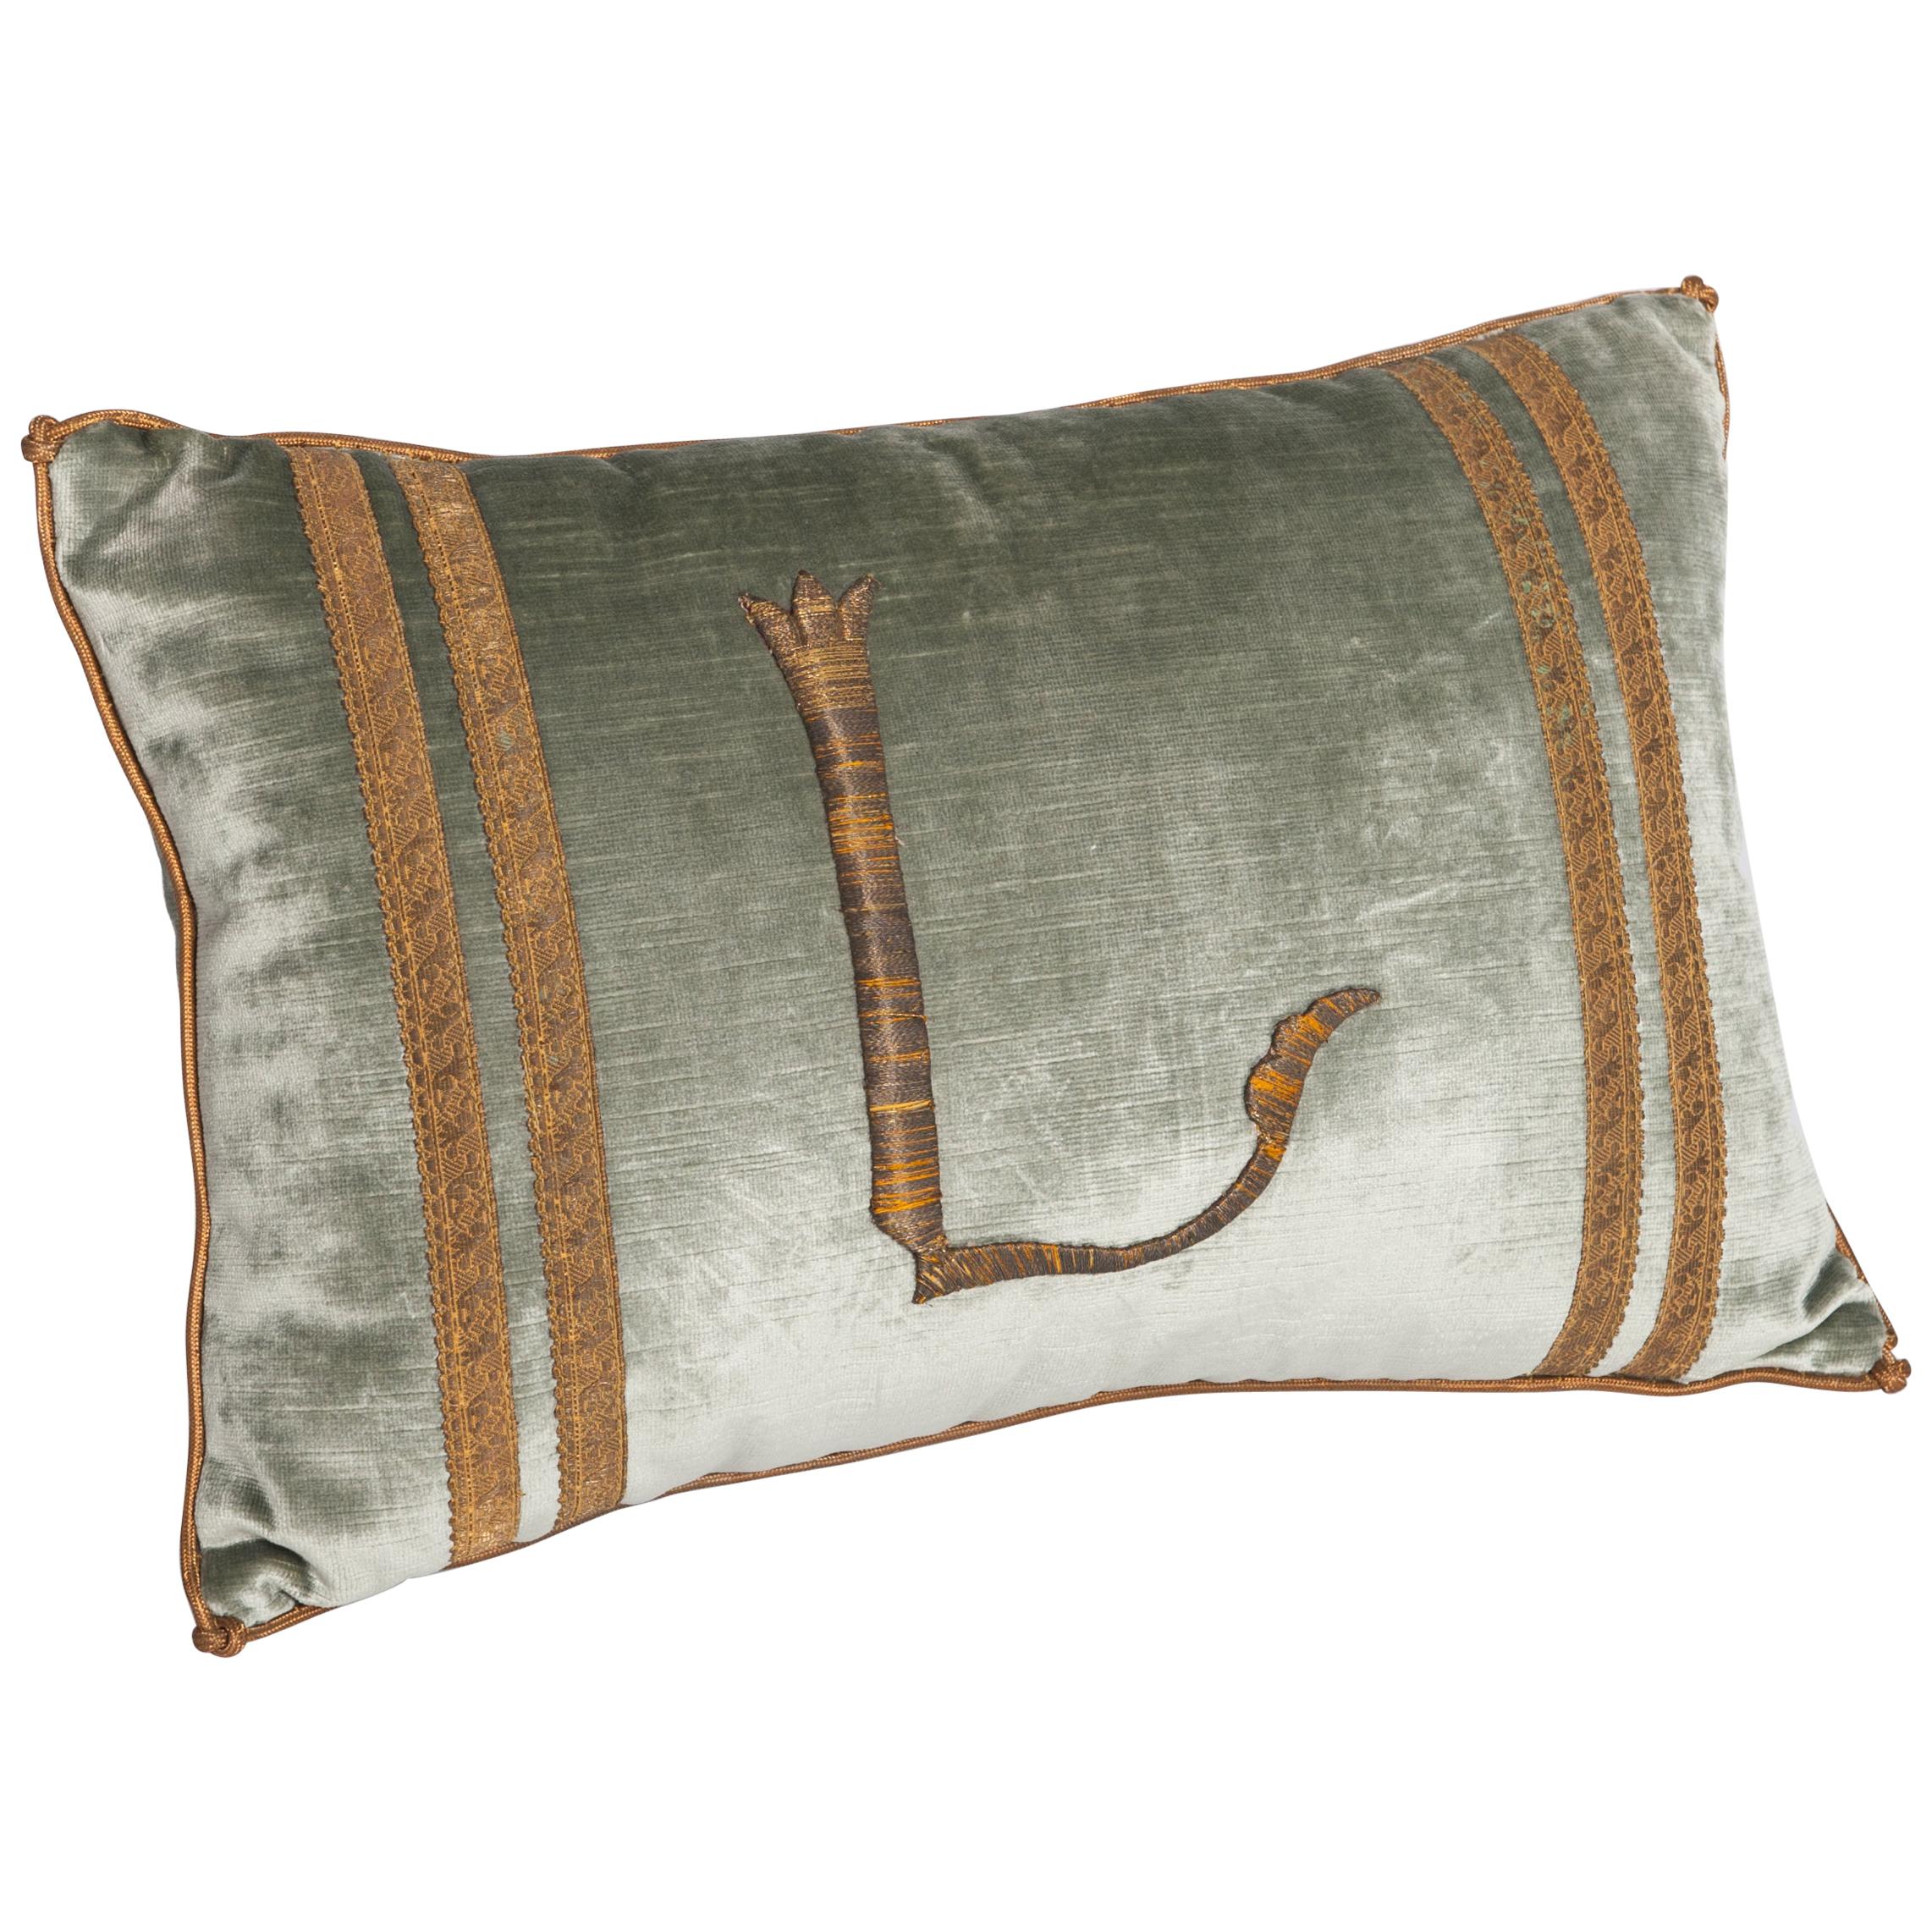 Pastel Green Colored Velvet Pillow with Antique Metallic Embroidery